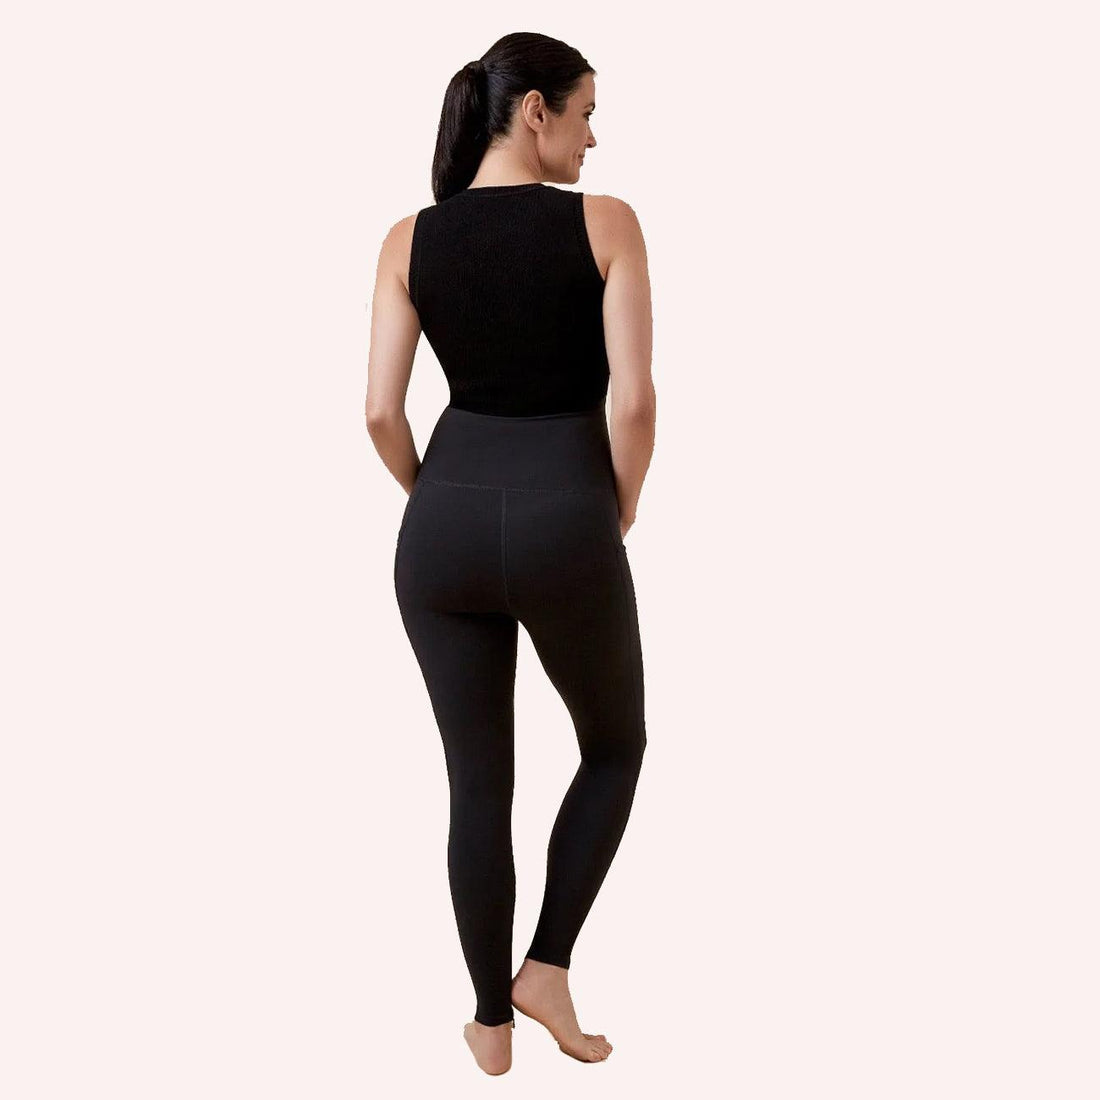 Patented Michelle Women's CORETECH® Injury Recovery and Postpartum  Compression Leggings